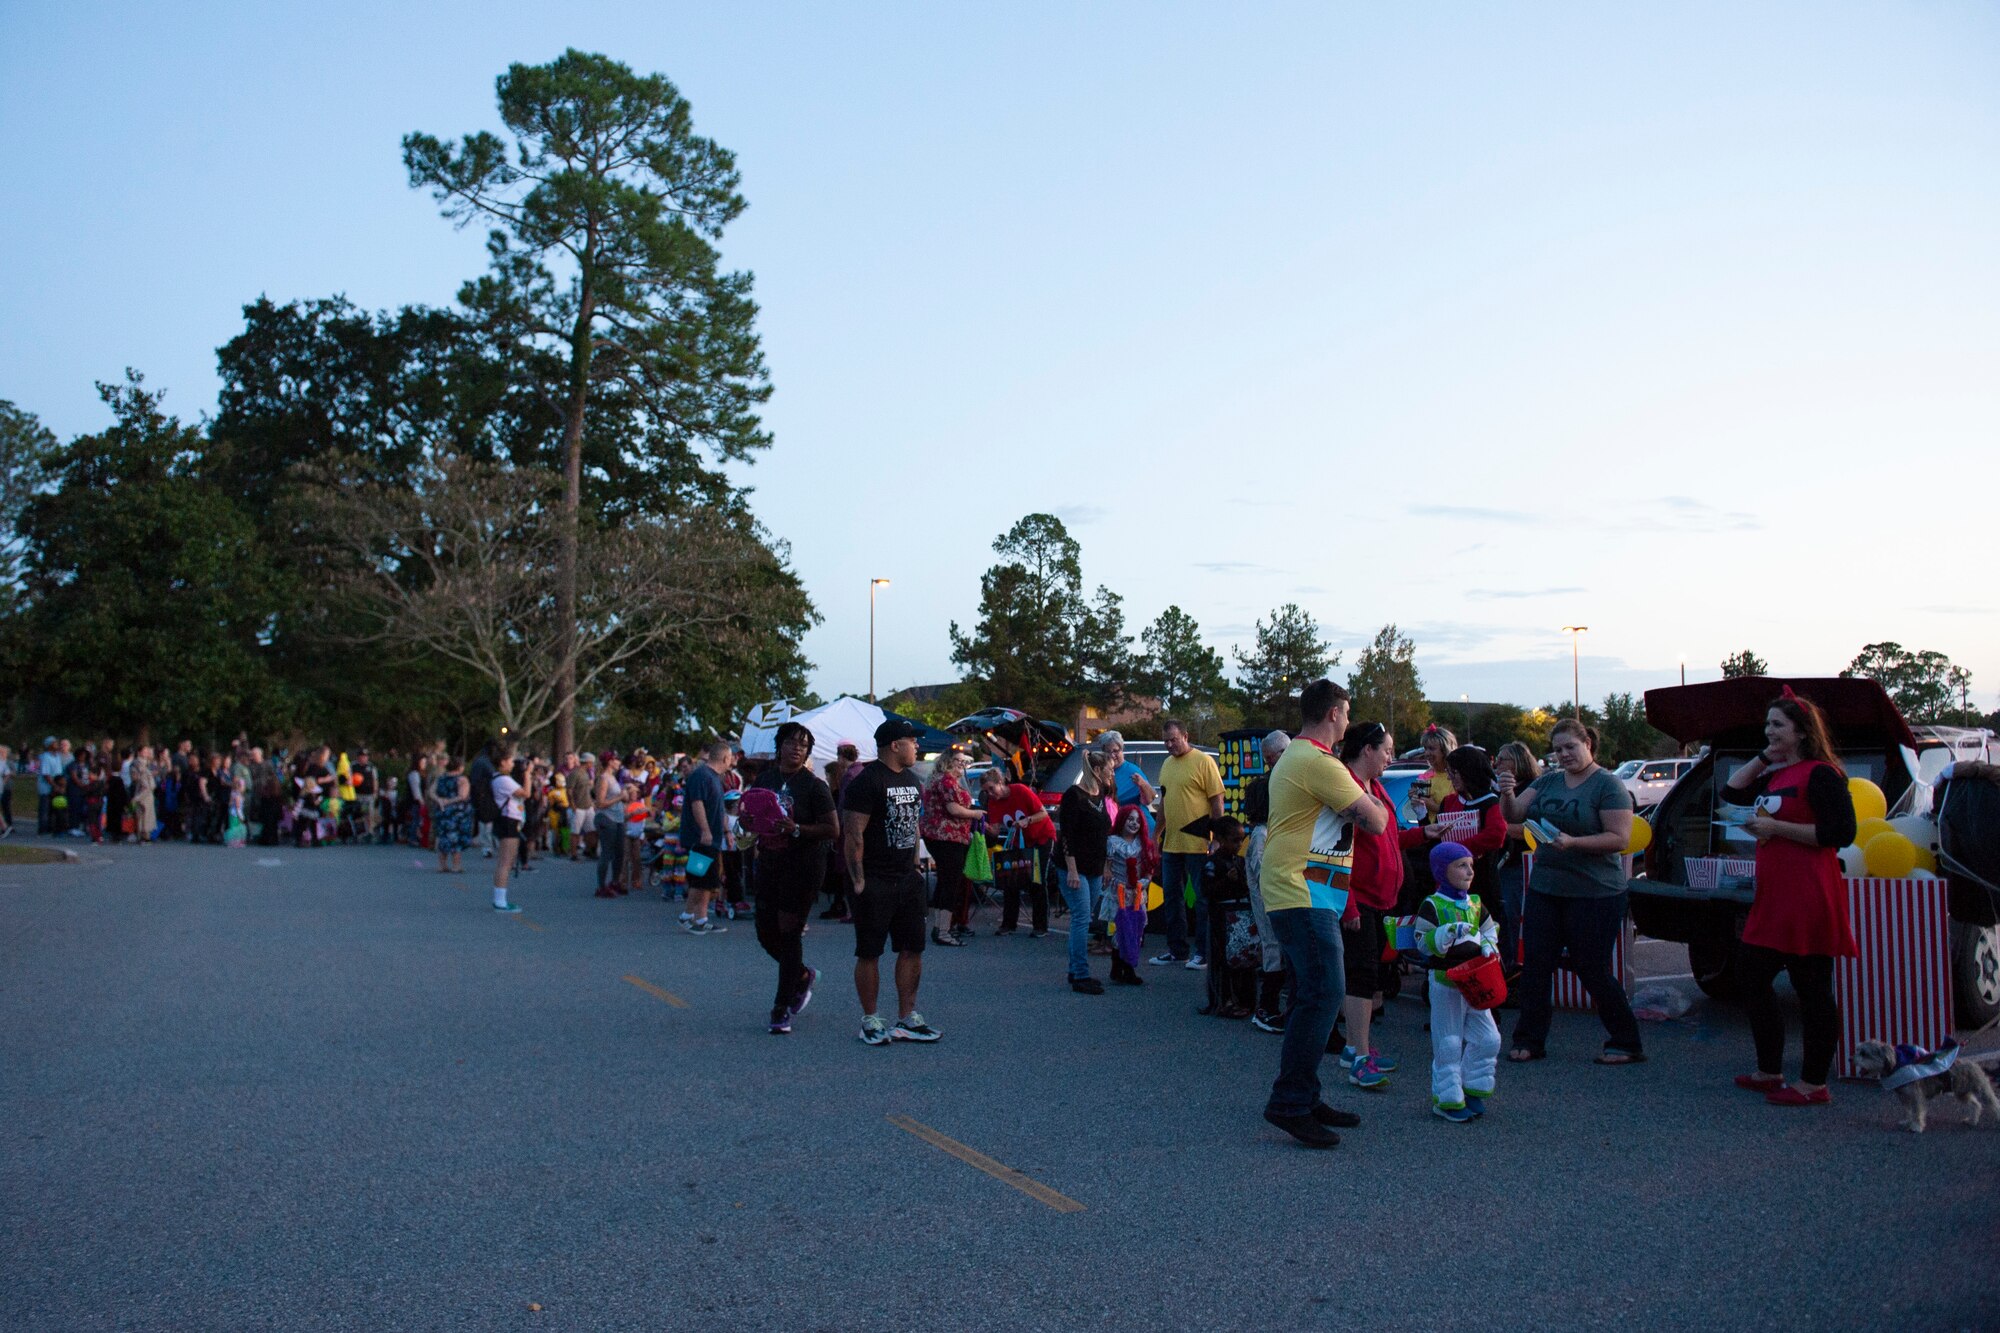 Participants line up for Trunk or Treat Oct. 25, 2019, at Moody Air Force Base, Ga. Participants, dressed in costumes, received candy from volunteers, who decorated their trunks. (U.S. Air Force photo by Airman 1st Class Jasmine M. Barnes)